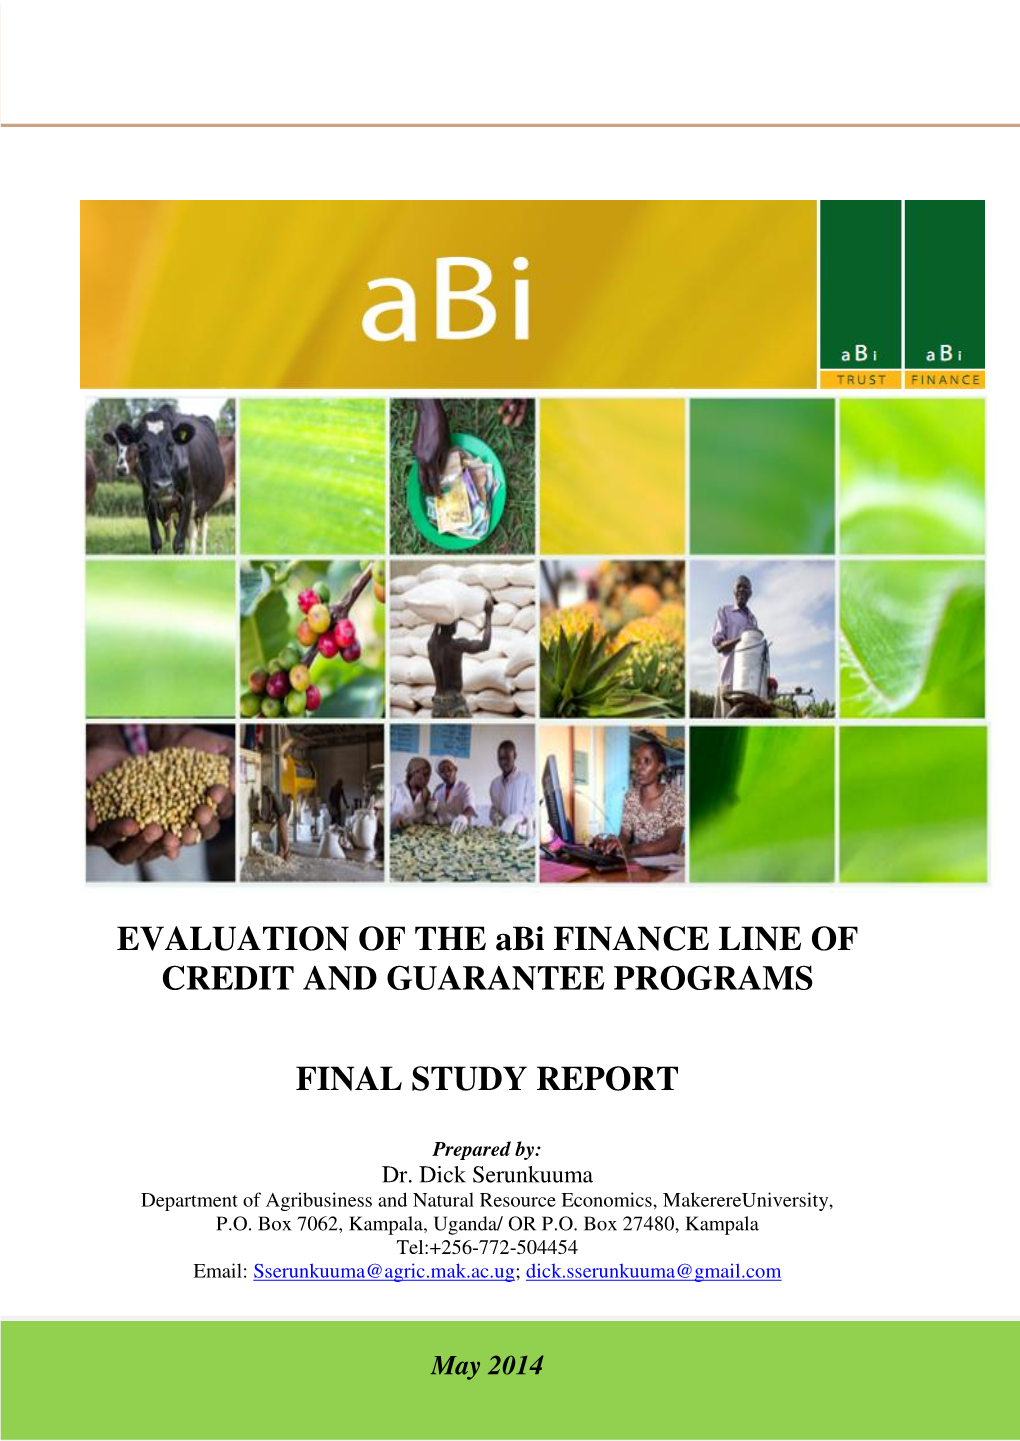 EVALUATION of the Abi FINANCE LINE of CREDIT and GUARANTEE PROGRAMS